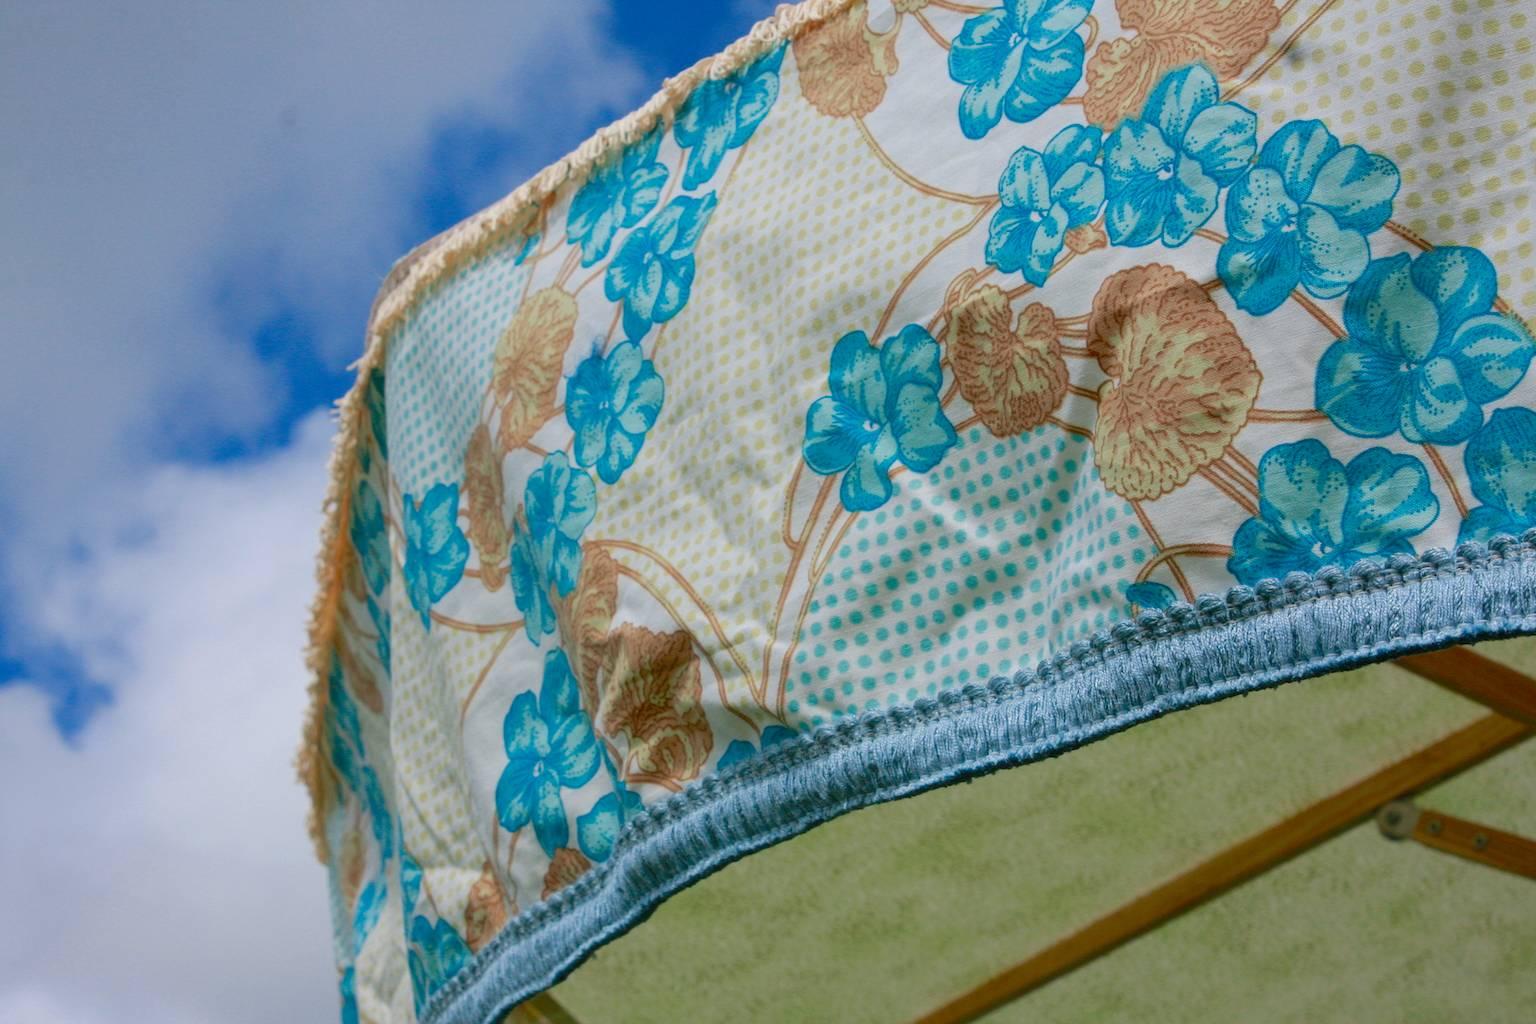 You are viewing 'Dance Me To the End of Love' one of Sunbeam Jackie's iconic sun umbrellas. 
This patio umbrella made using a unique combination of vintage fabrics from legendary British textile houses including Designers Guild and Sanderson. See